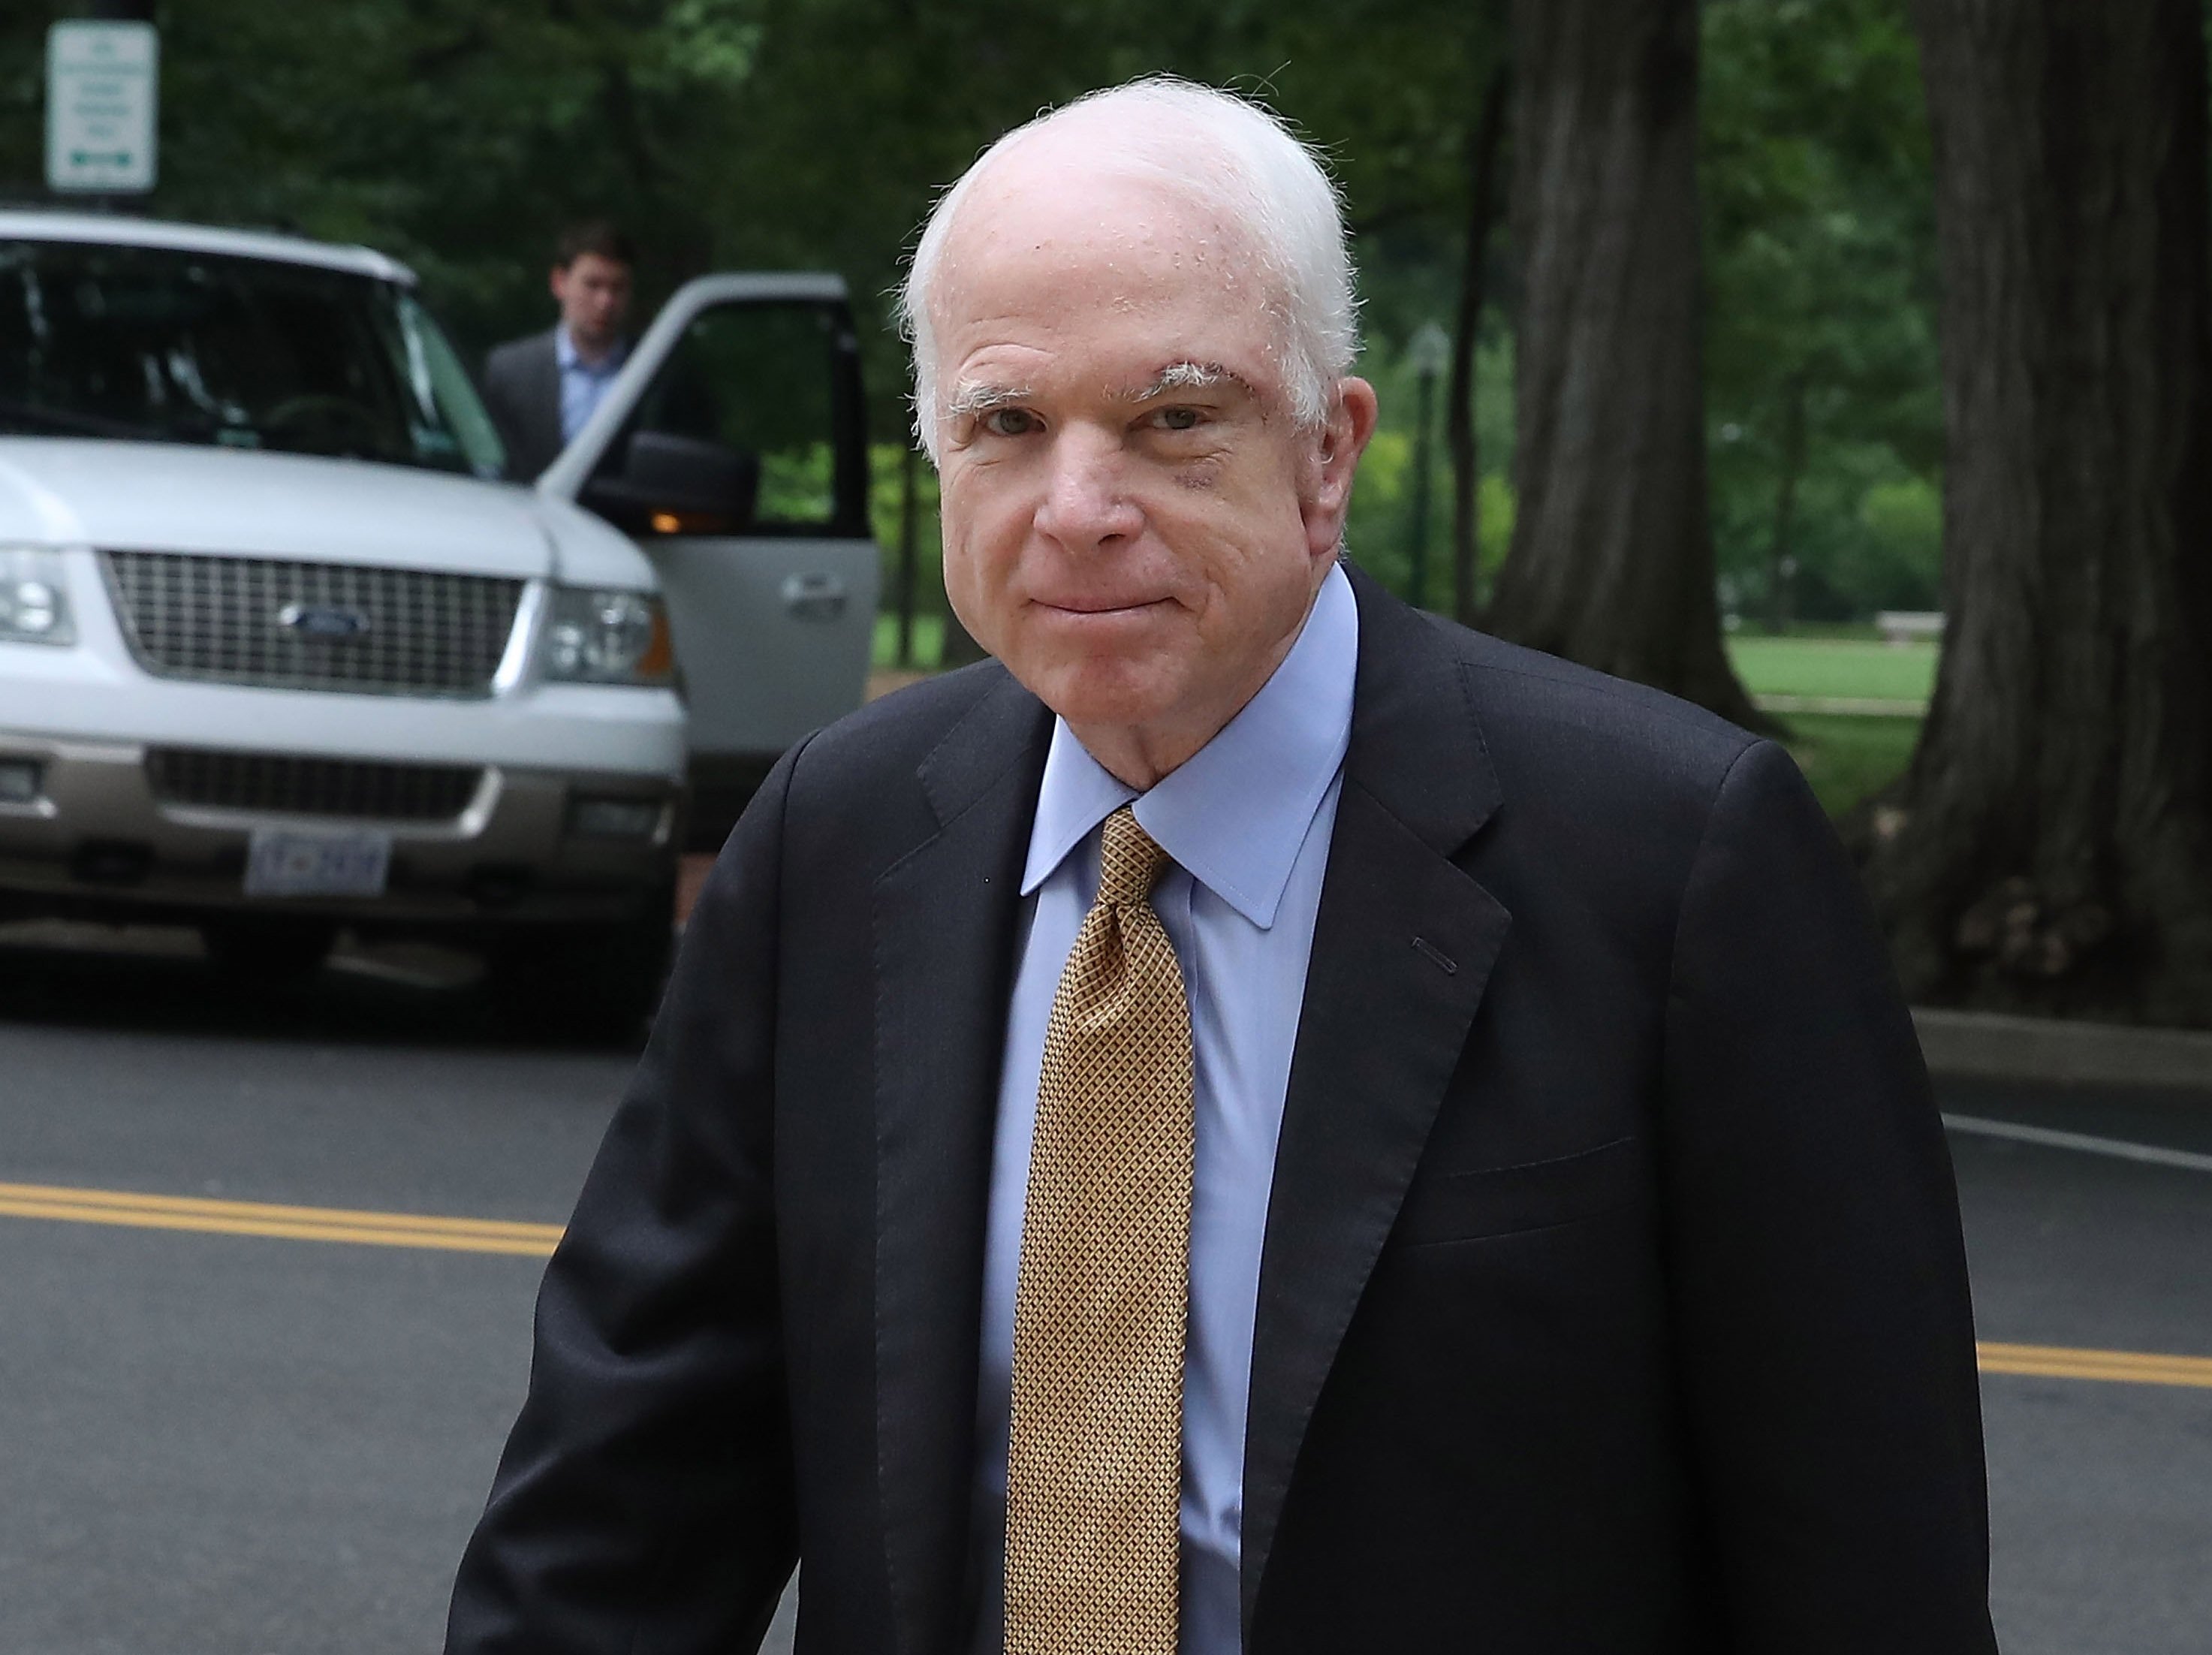 Sen. John McCain arrives for work on Capitol Hill hours after voting NO on the GOP 'Skinny Repeal' health care bill, on July 28, 2017 in Washington, DC. (Photo by Mark Wilson/Getty Images)